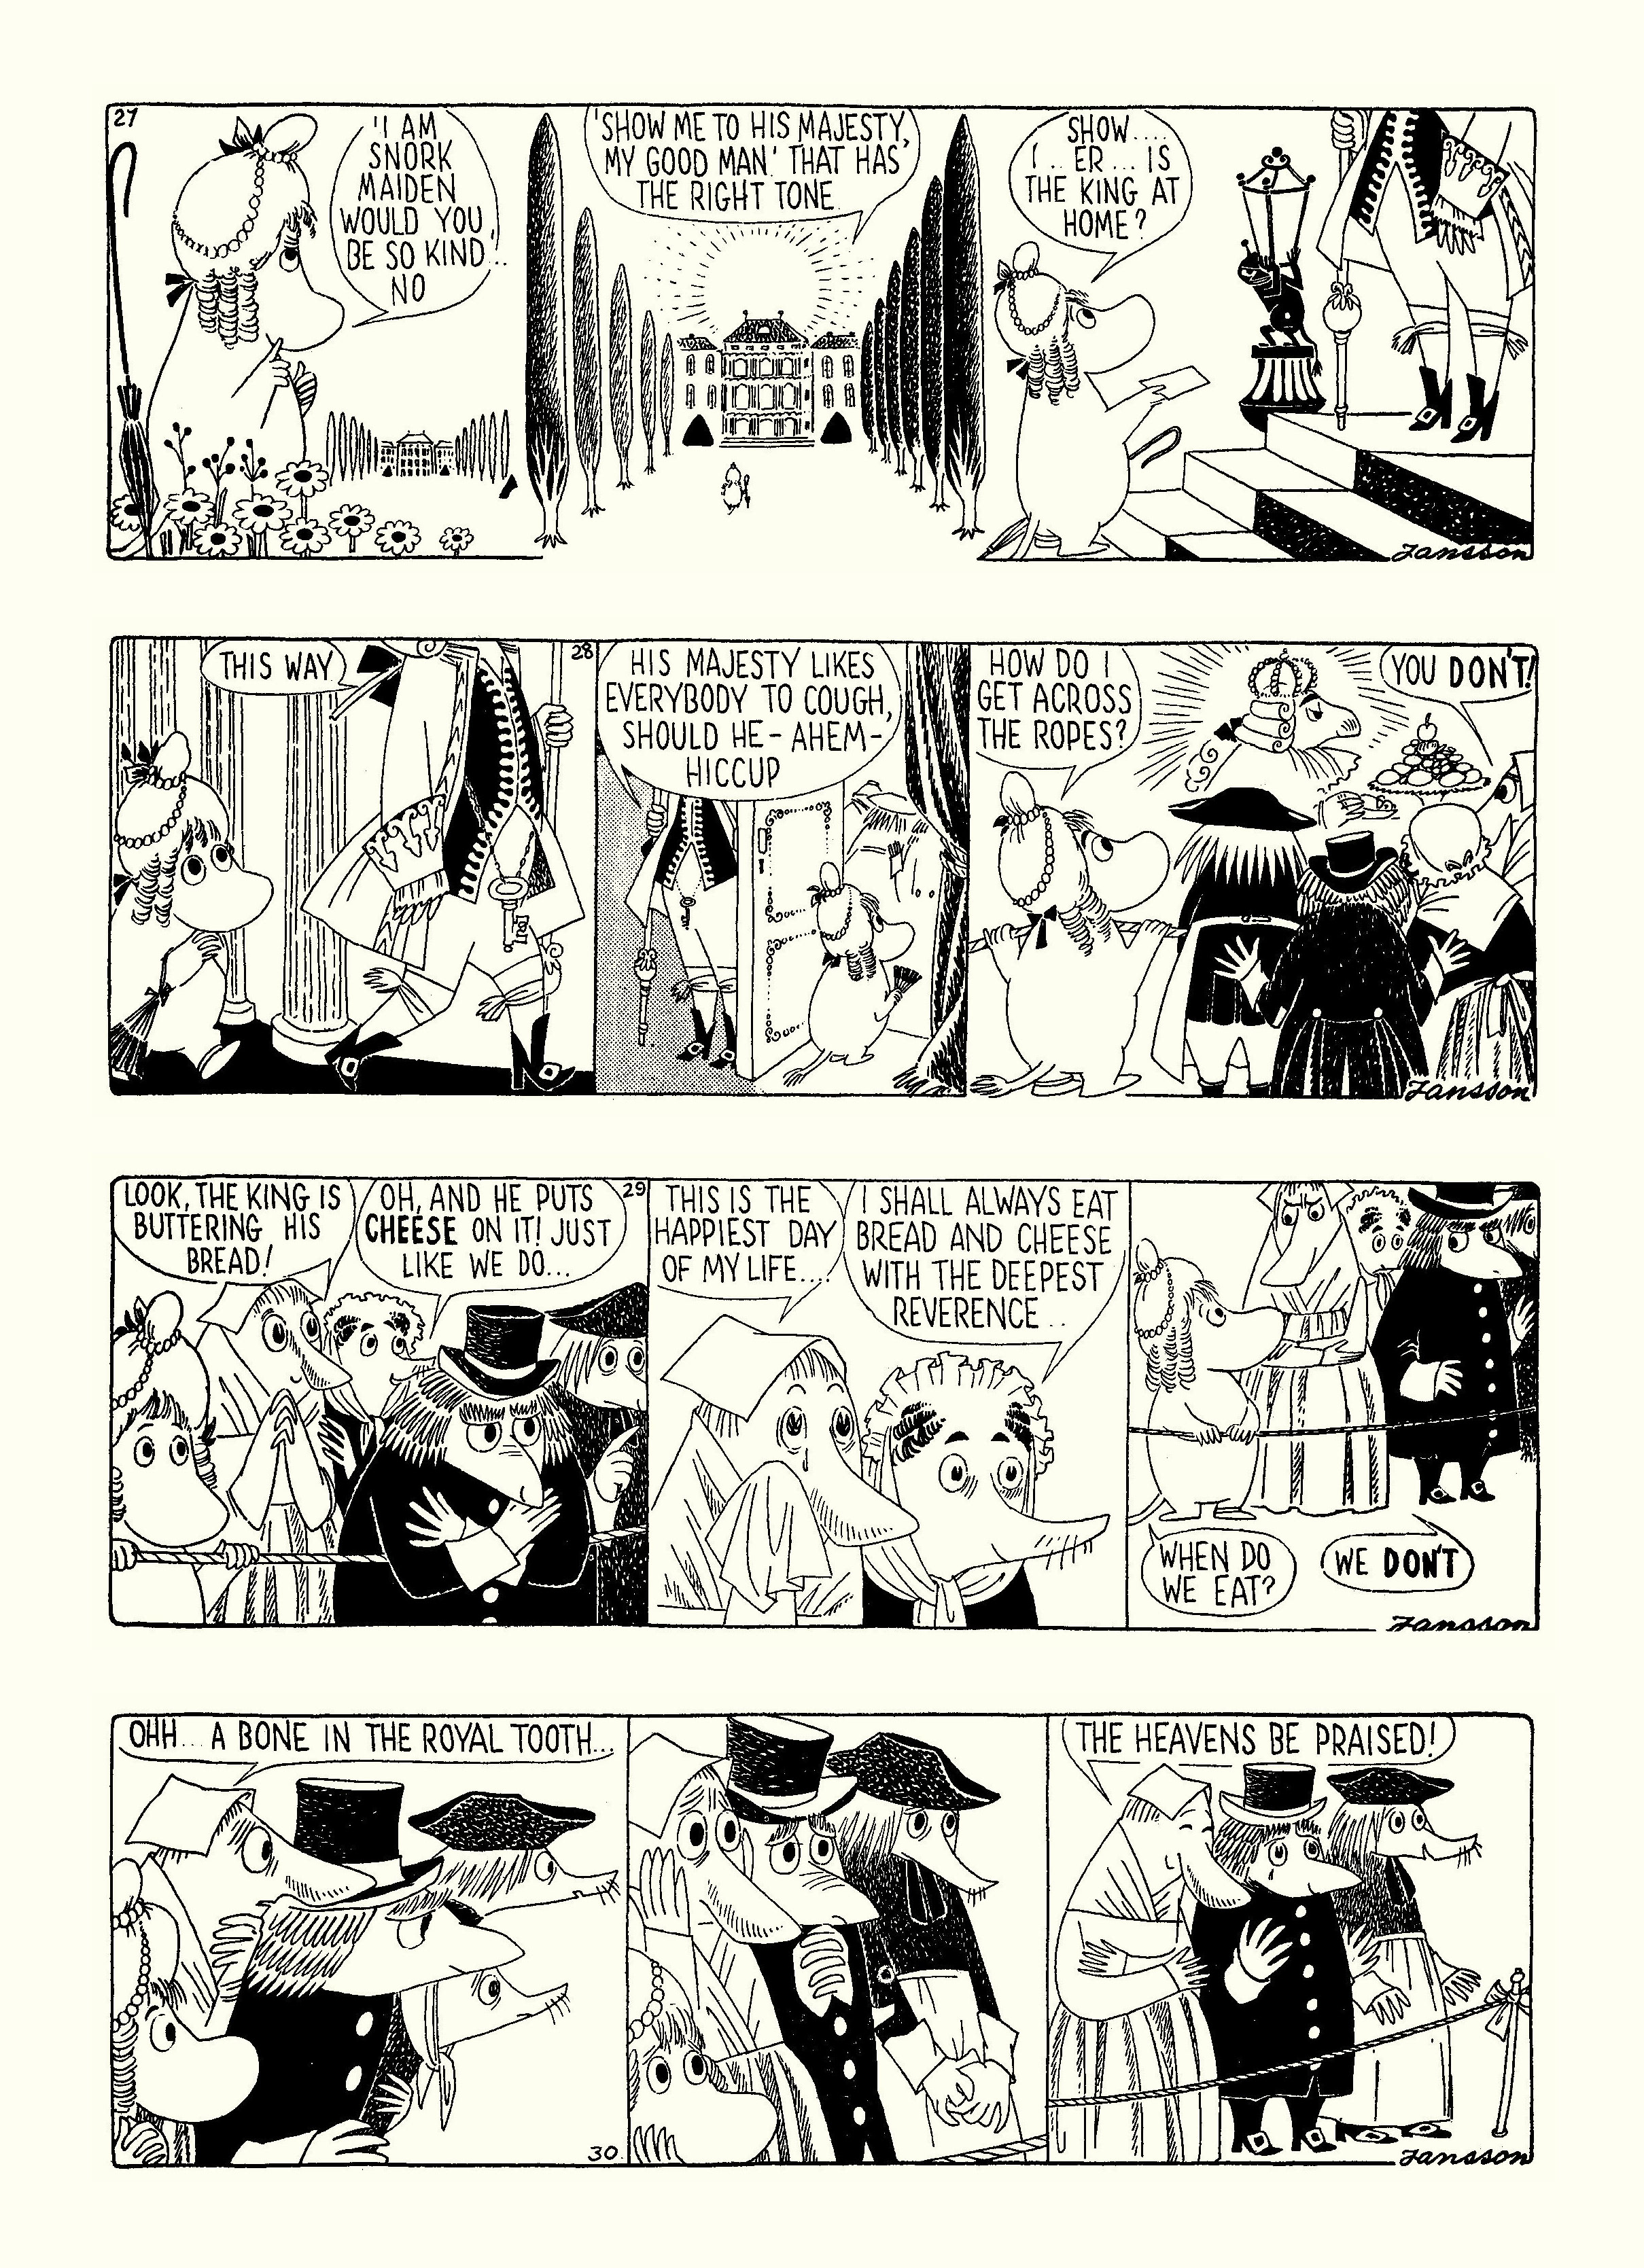 Read online Moomin: The Complete Tove Jansson Comic Strip comic -  Issue # TPB 4 - 30